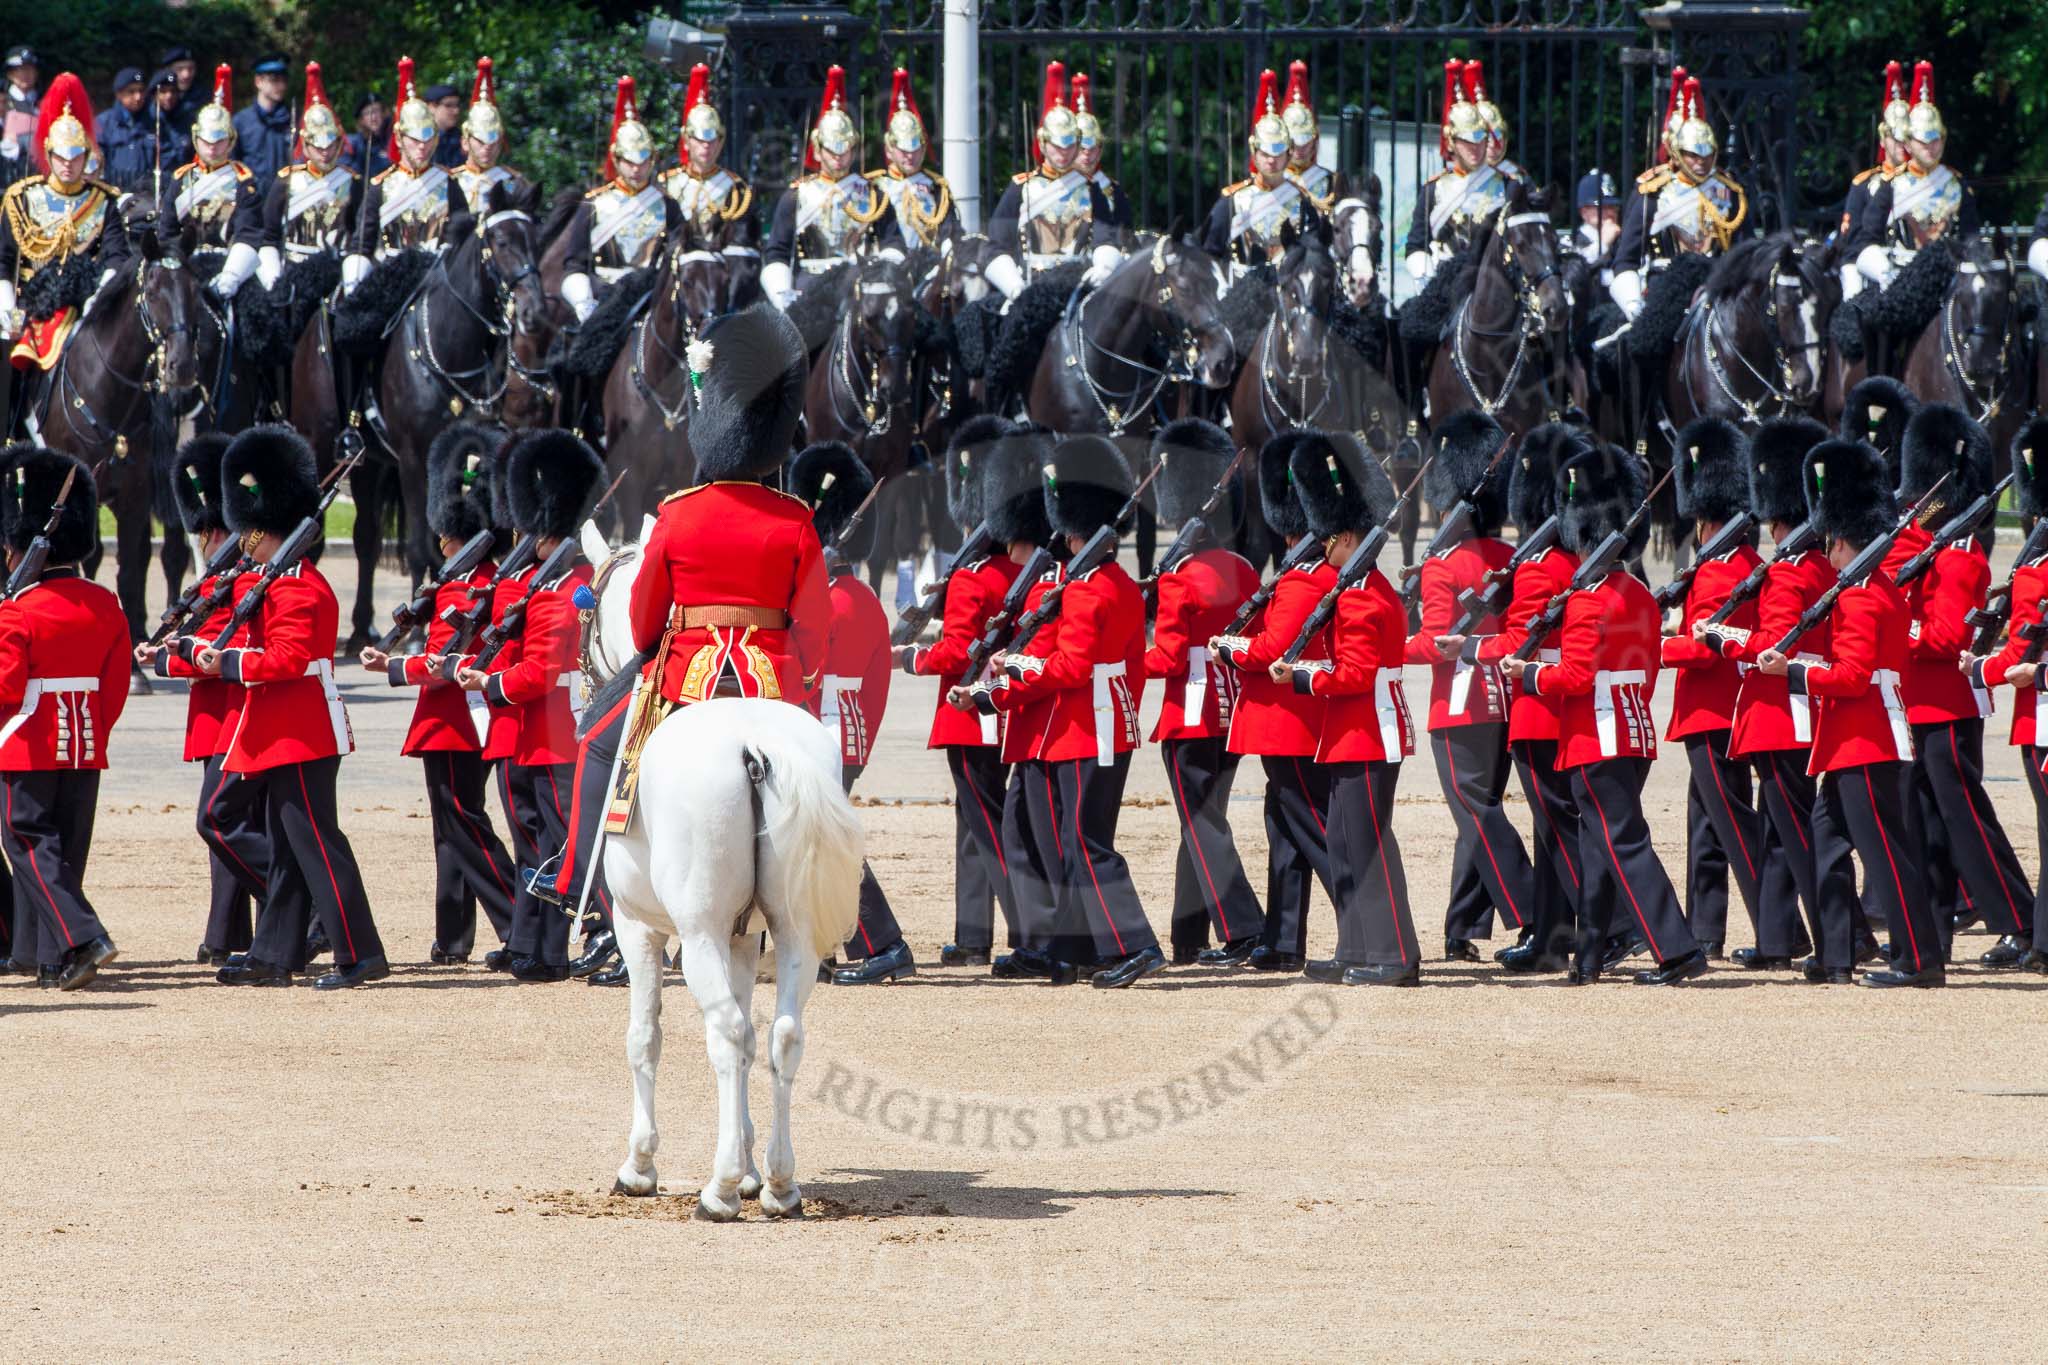 The Colonel's Review 2013: The six guards change formation, from a long, L-shaped line of guardsmen to six divisions..
Horse Guards Parade, Westminster,
London SW1,

United Kingdom,
on 08 June 2013 at 12:03, image #809